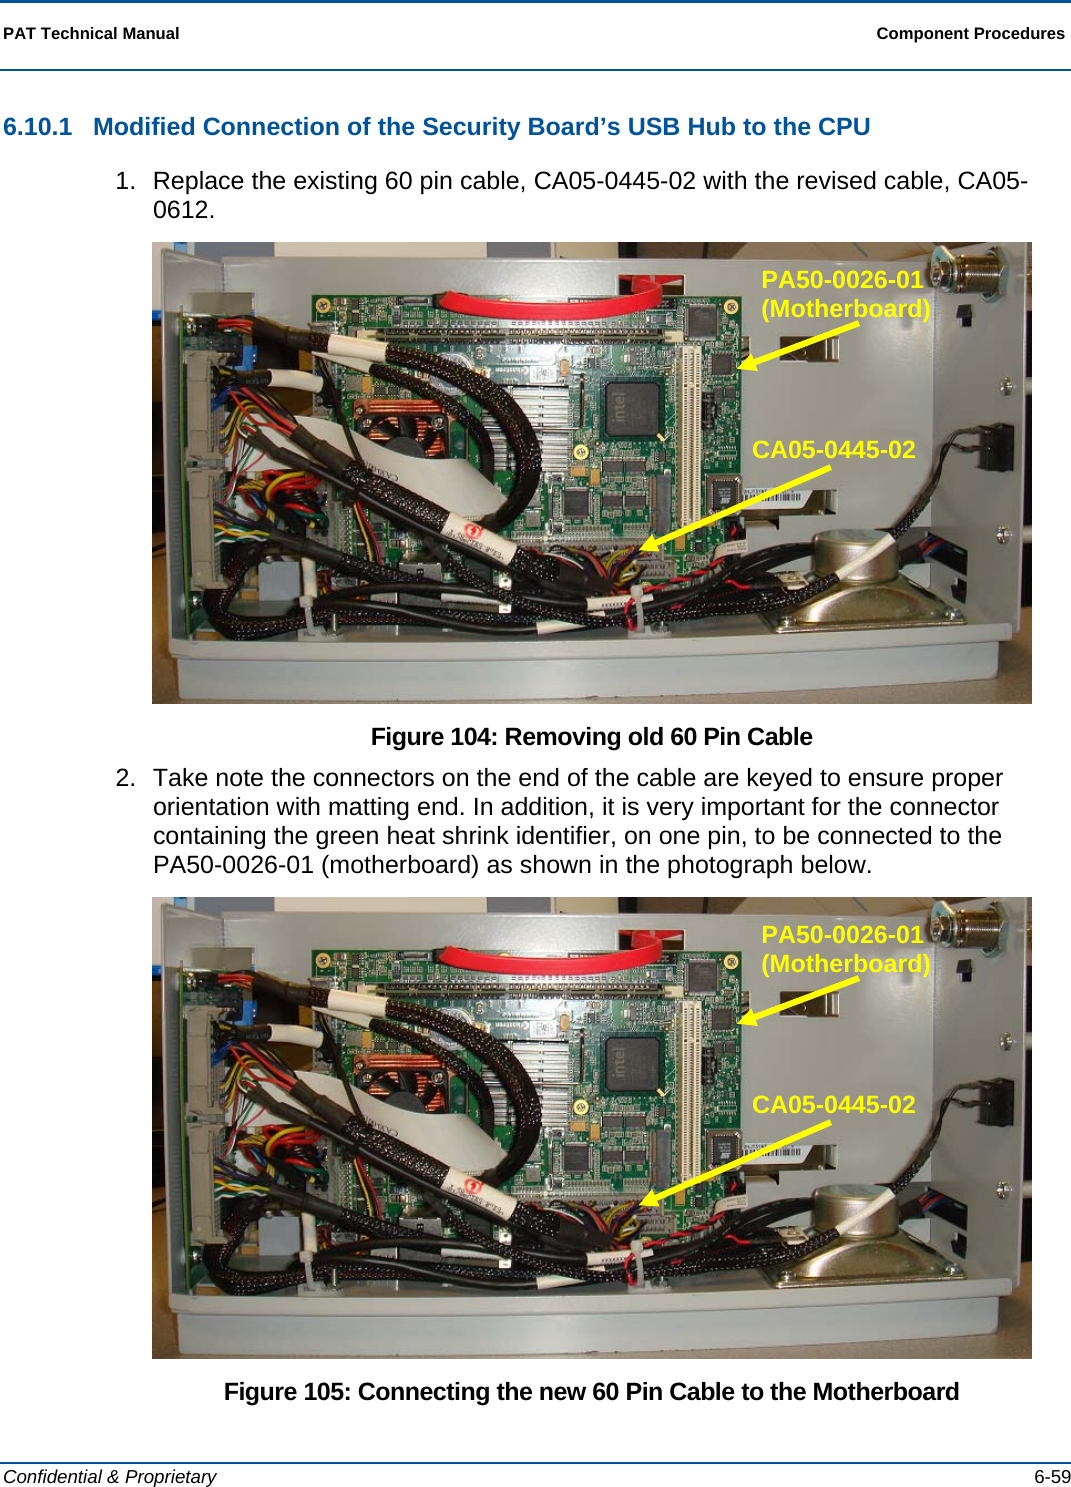  PAT Technical Manual  Component Procedures  Confidential &amp; Proprietary   6-59 6.10.1  Modified Connection of the Security Board’s USB Hub to the CPU 1.  Replace the existing 60 pin cable, CA05-0445-02 with the revised cable, CA05-0612.  Figure 104: Removing old 60 Pin Cable 2.  Take note the connectors on the end of the cable are keyed to ensure proper orientation with matting end. In addition, it is very important for the connector containing the green heat shrink identifier, on one pin, to be connected to the PA50-0026-01 (motherboard) as shown in the photograph below.  Figure 105: Connecting the new 60 Pin Cable to the Motherboard CA05-0445-02 PA50-0026-01 (Motherboard) CA05-0445-02 PA50-0026-01 (Motherboard) 